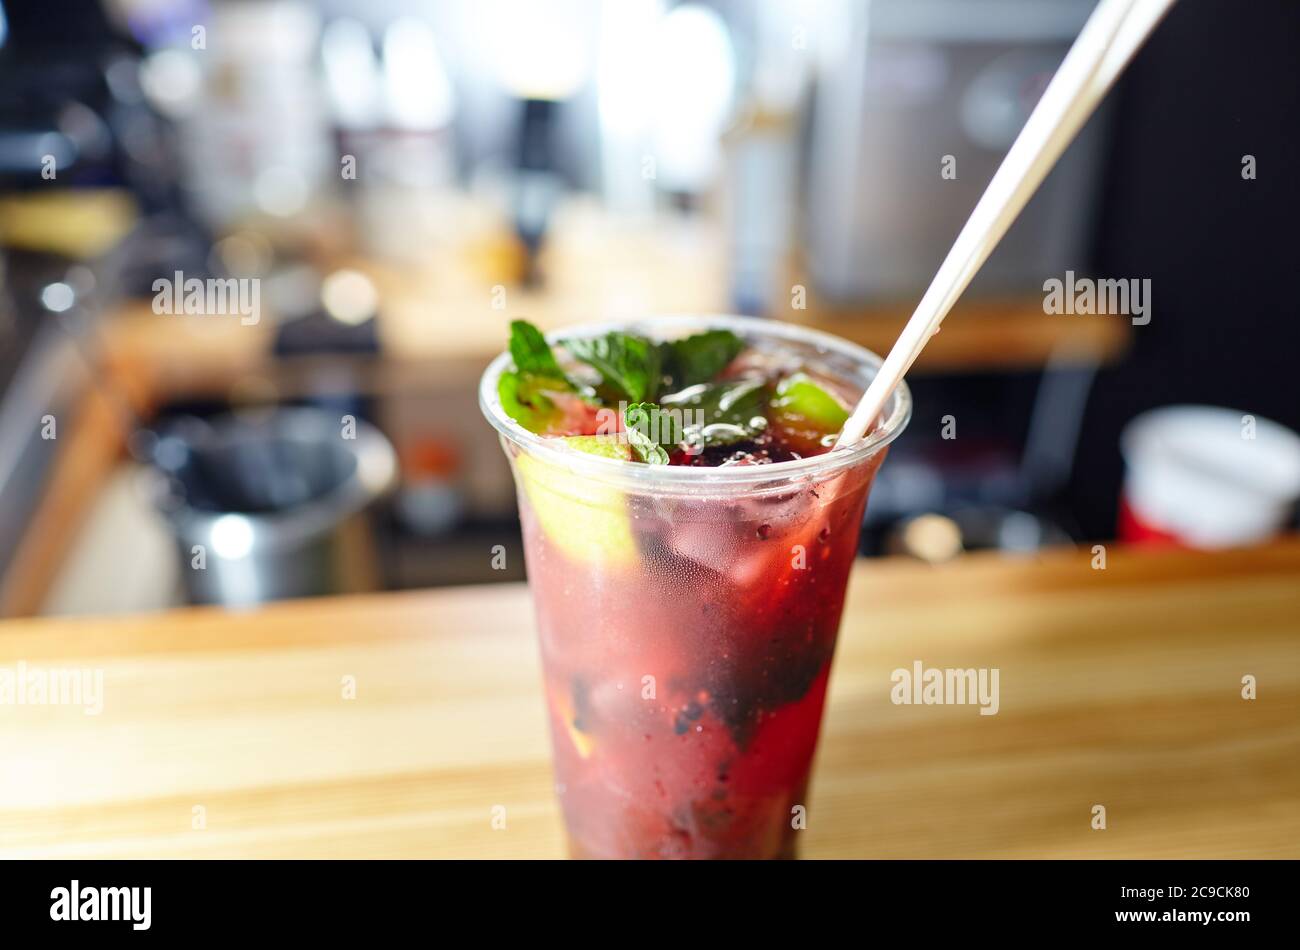 Mojito cocktail or soda drink with lime,raspberry and mint on table in bar.Blurred image,selective focus Stock Photo